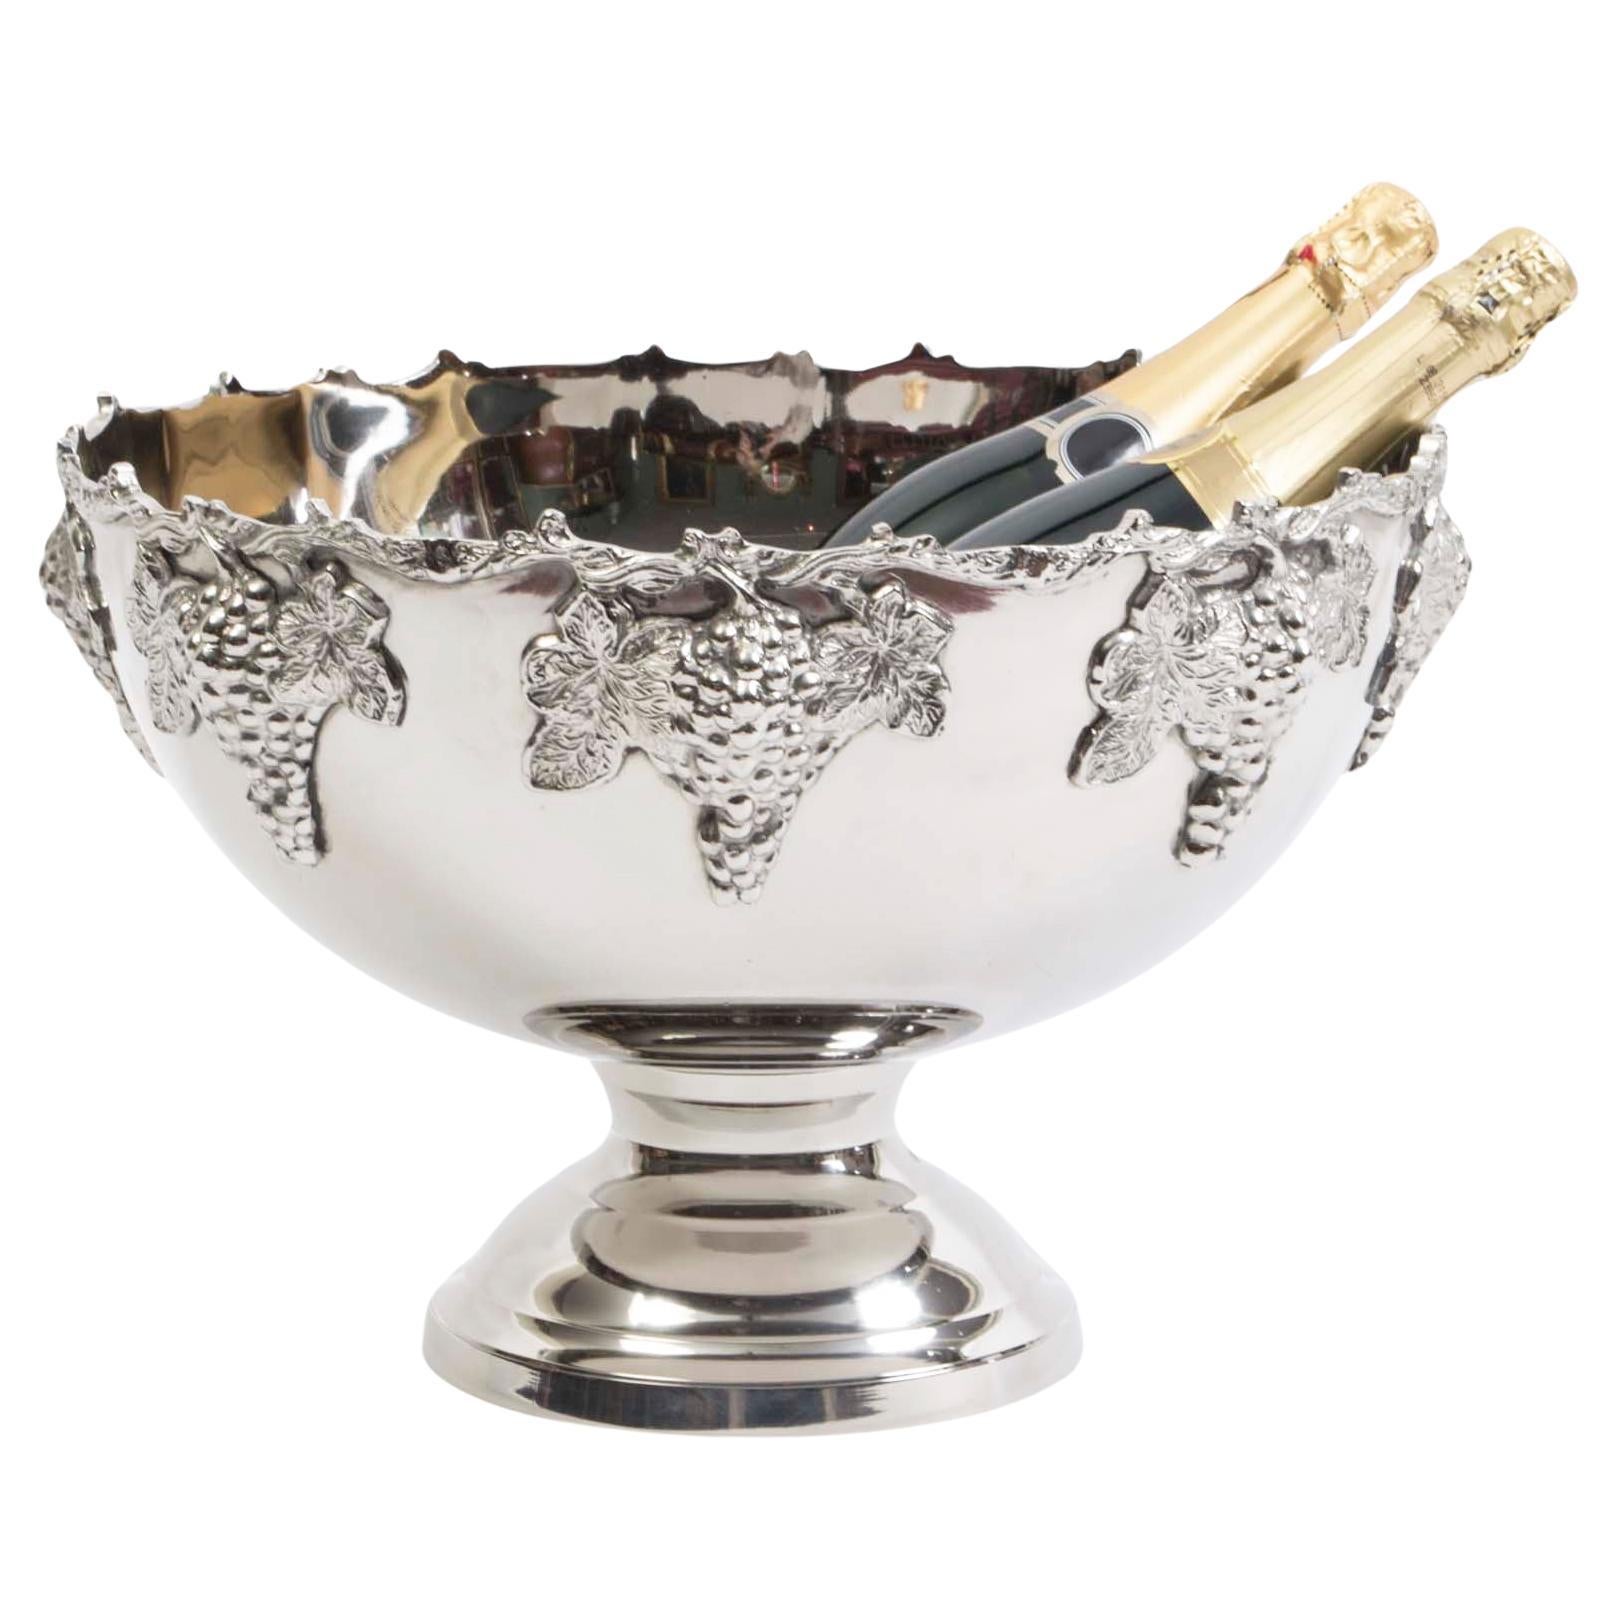 Vintage Silver Plated Monteith Punch Bowl Champagne Cooler 20th Century